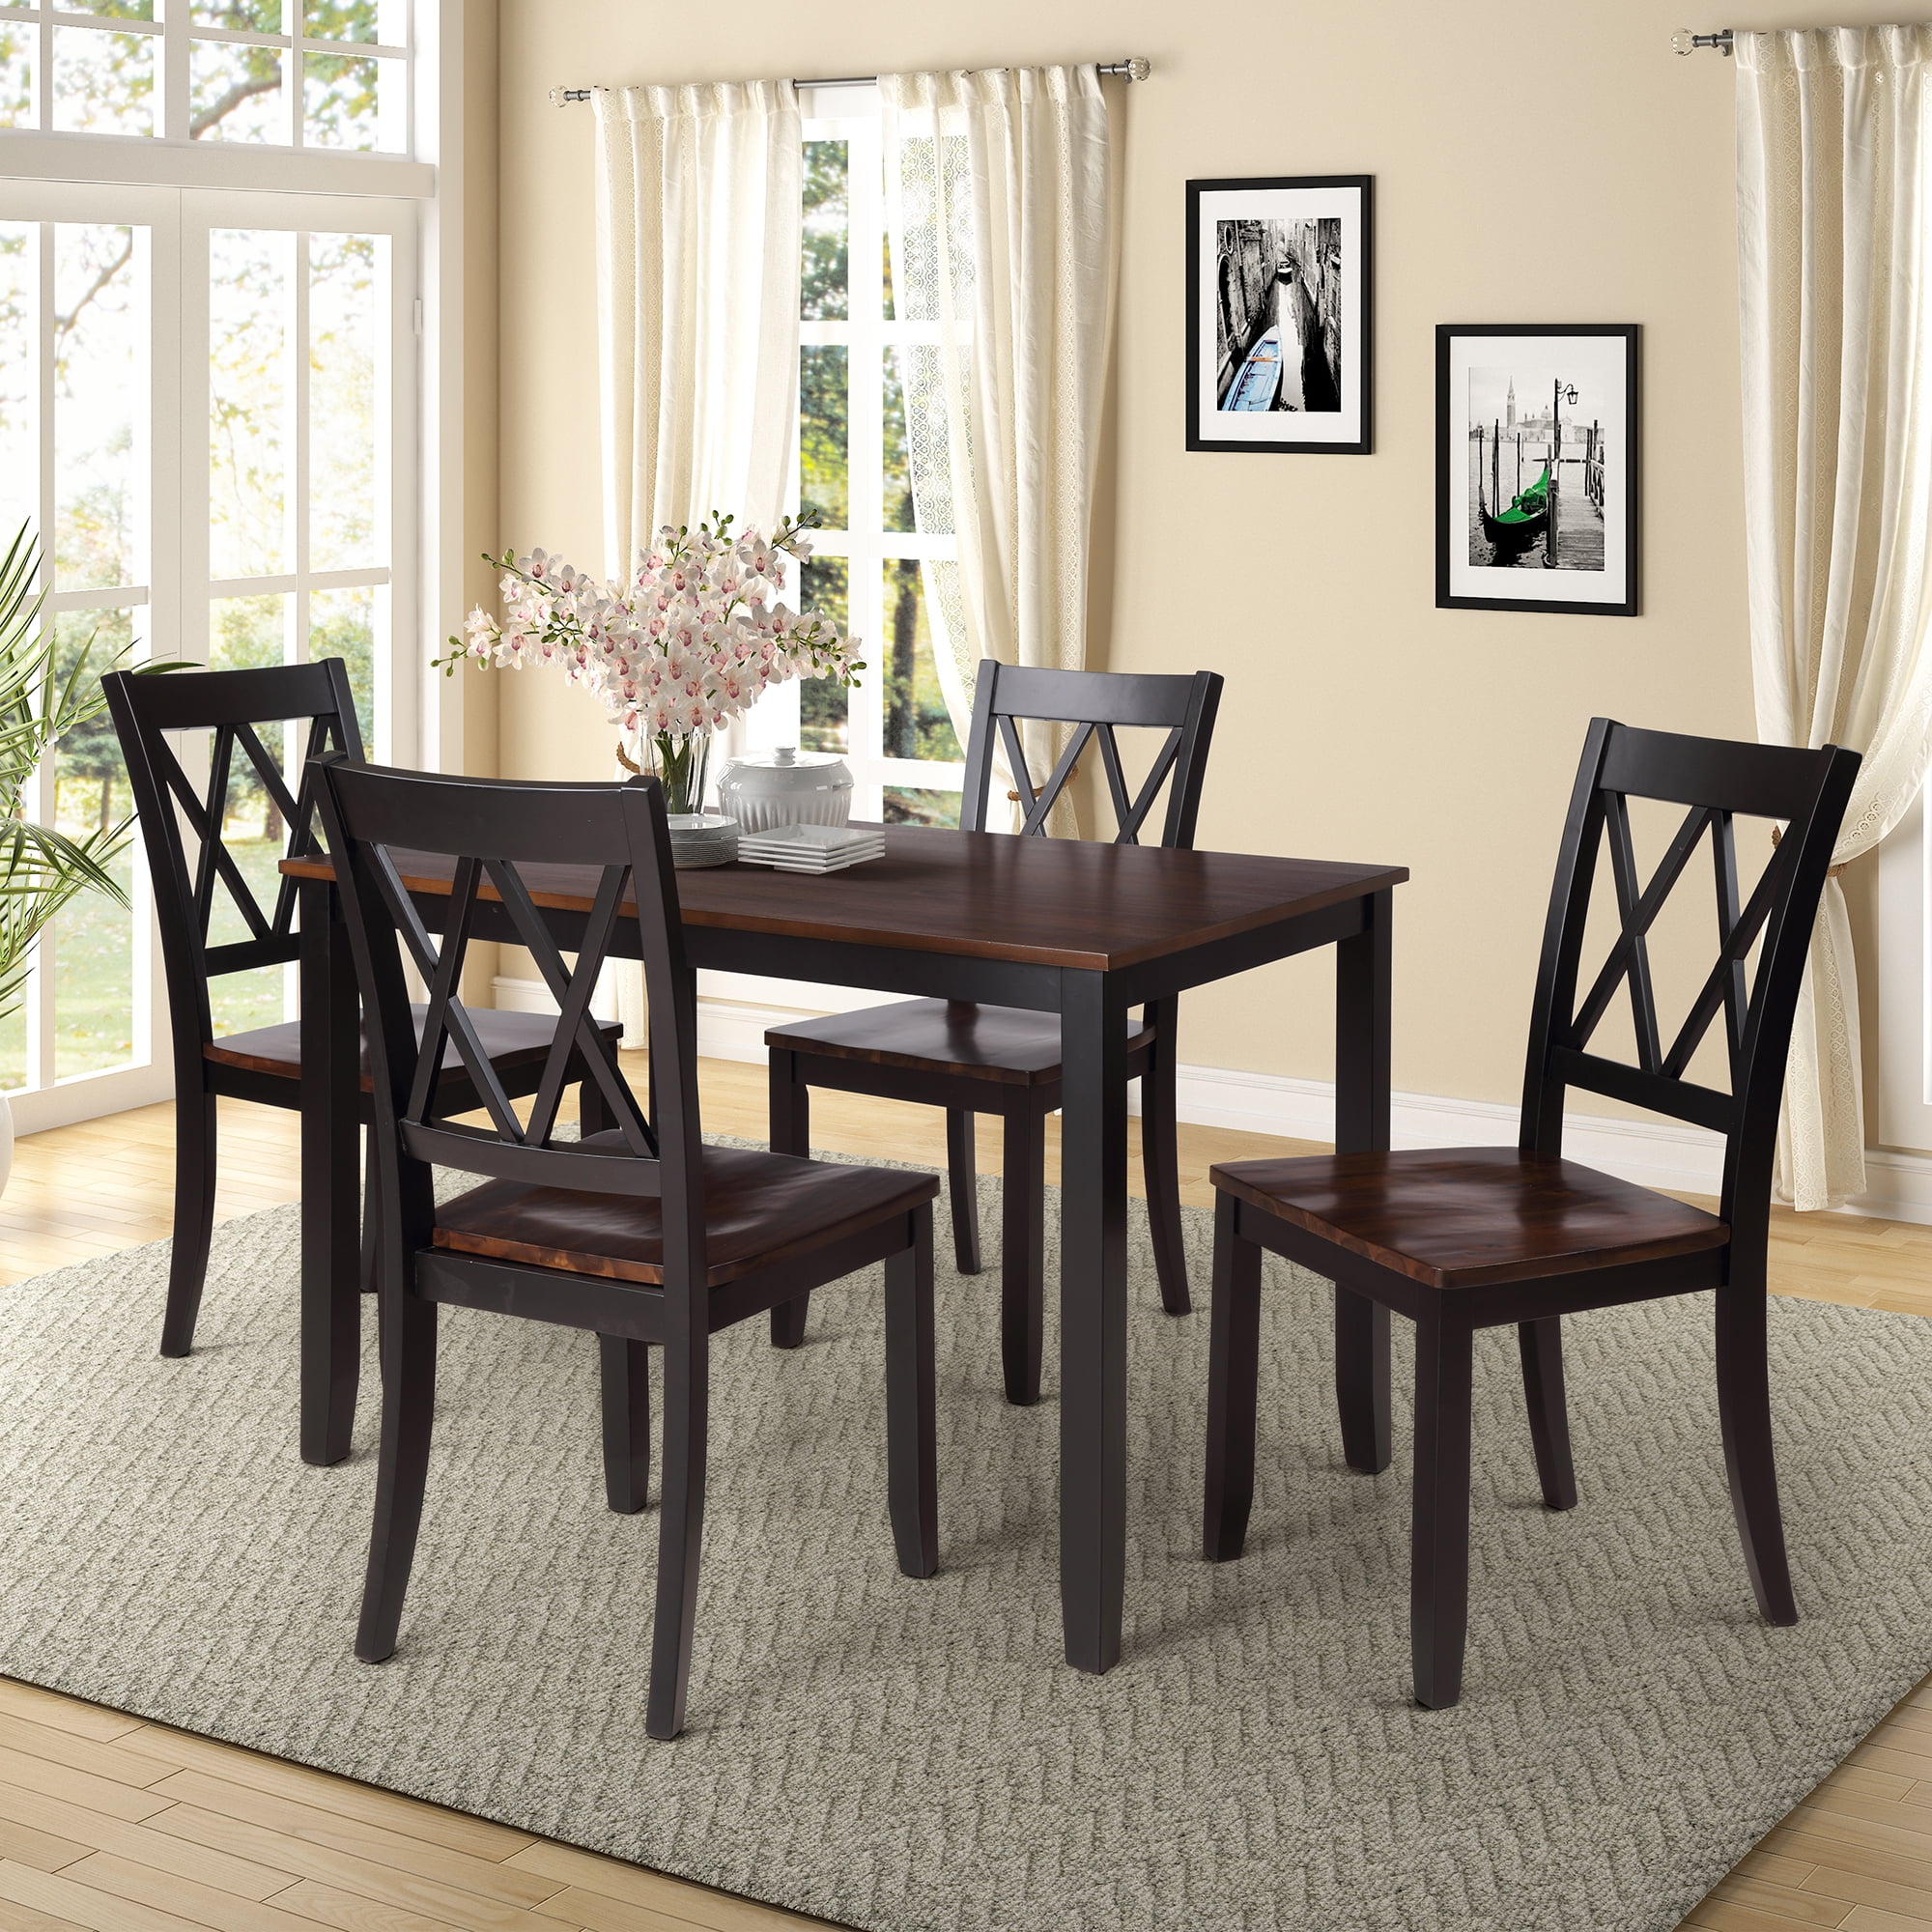 Dinette Set Dining Table With 1, Black Kitchen Table And 4 Chairs